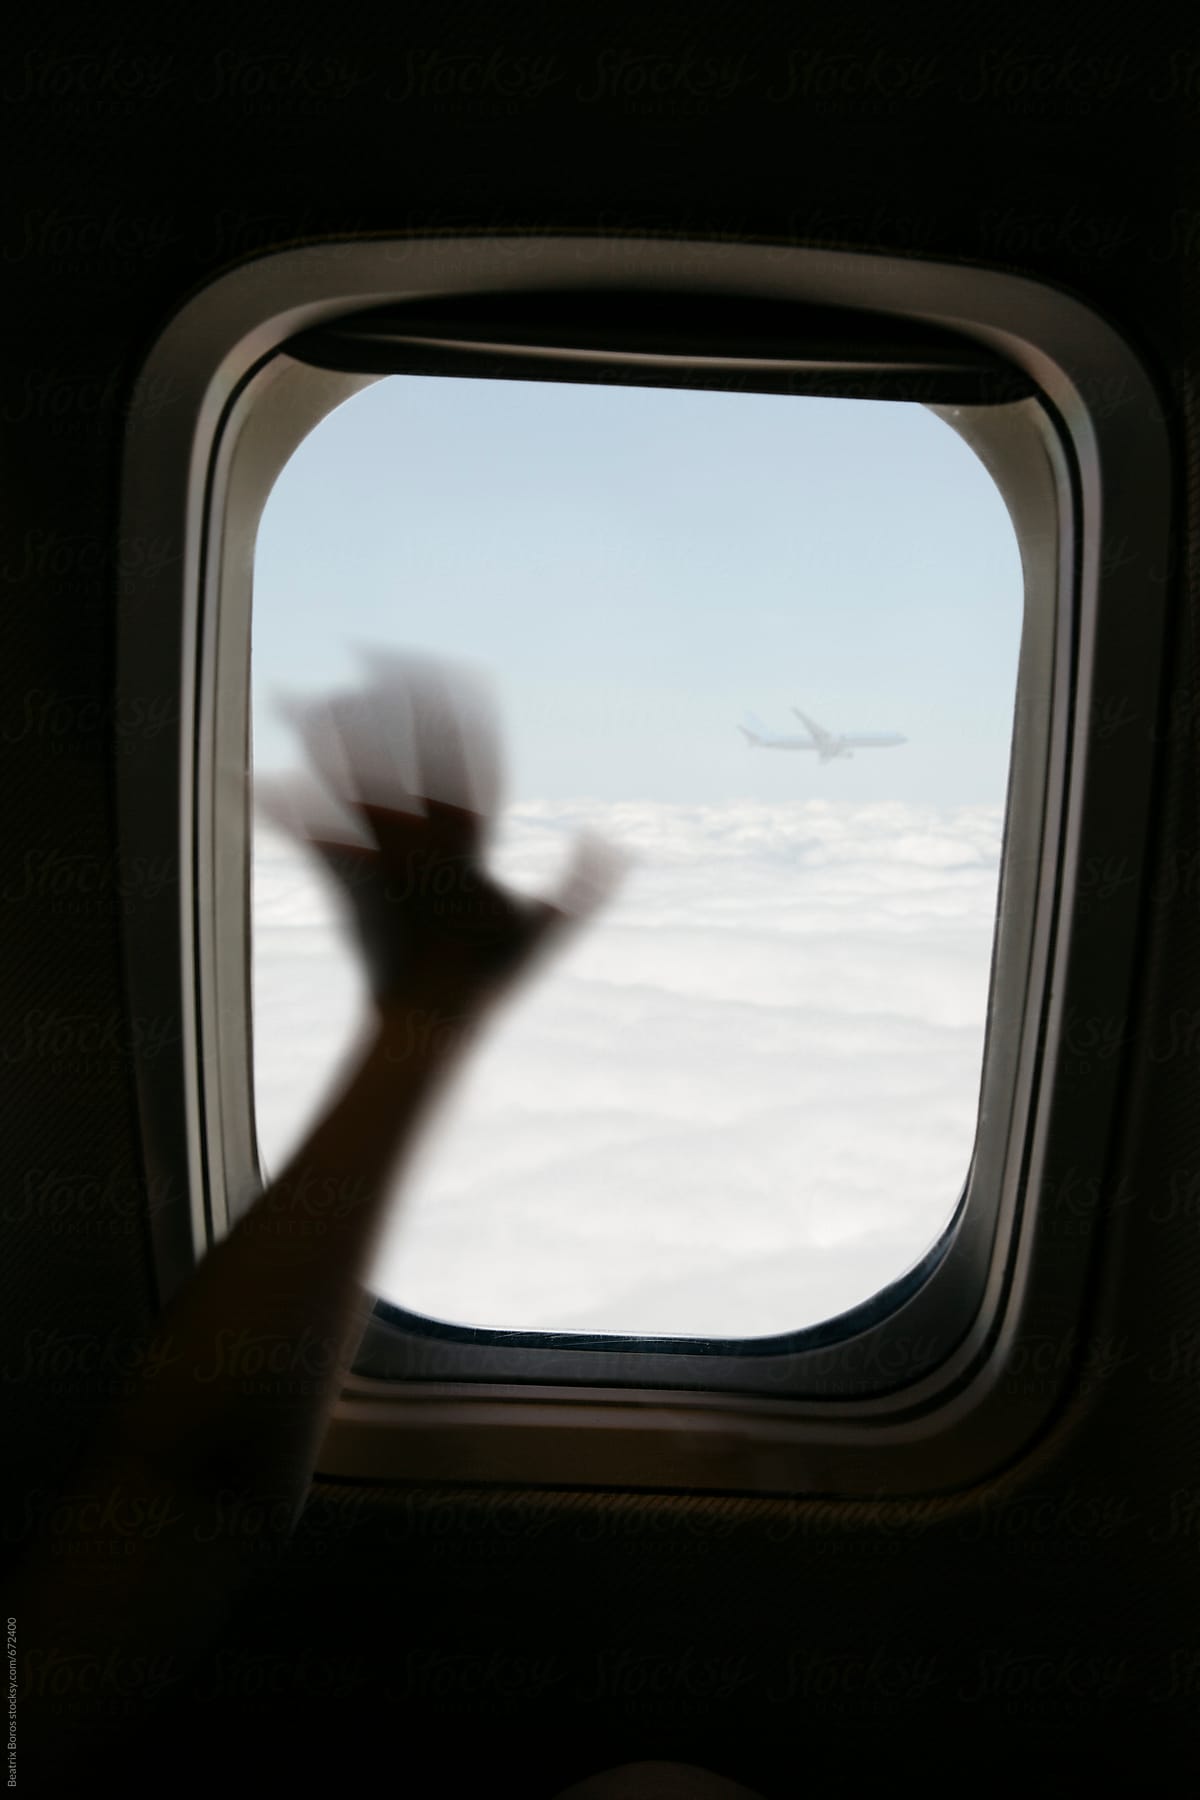 Waving hand at a window seat on an aircraft saying hello to another plane in the air